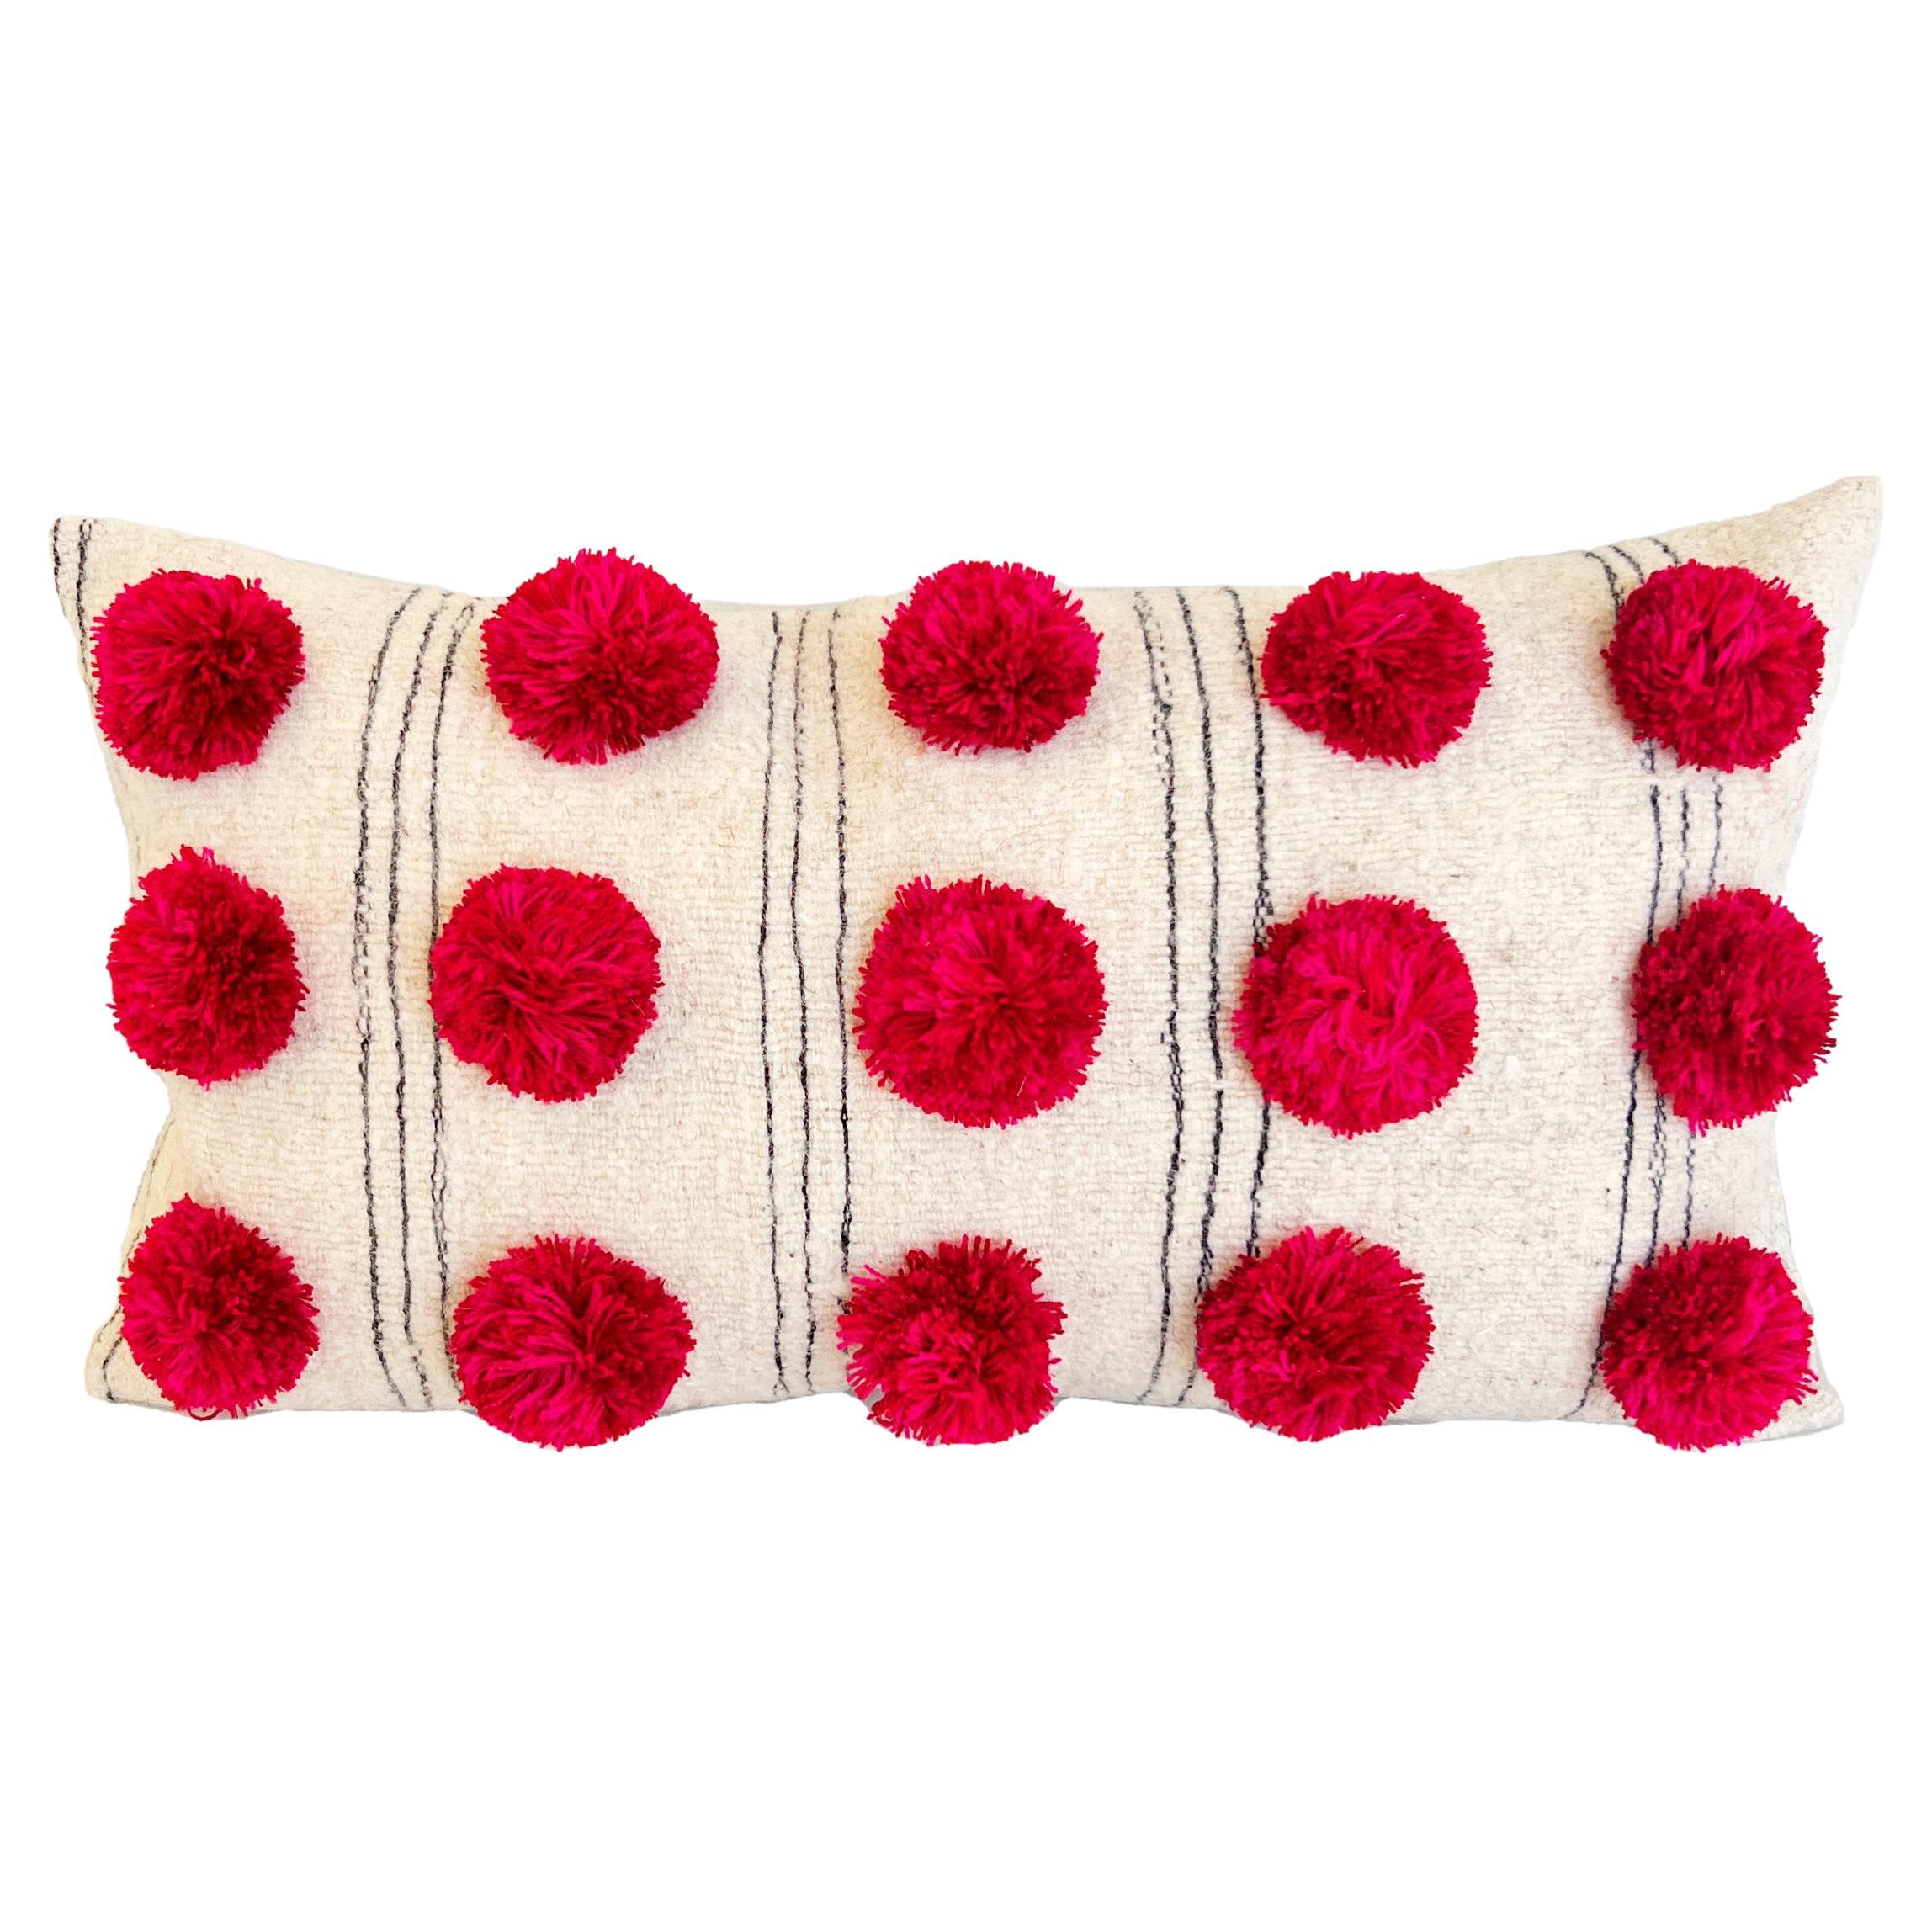 Chamula White with Gray Stripes Red Pom Pom Throw Pillow Handmade from 100% Wool For Sale